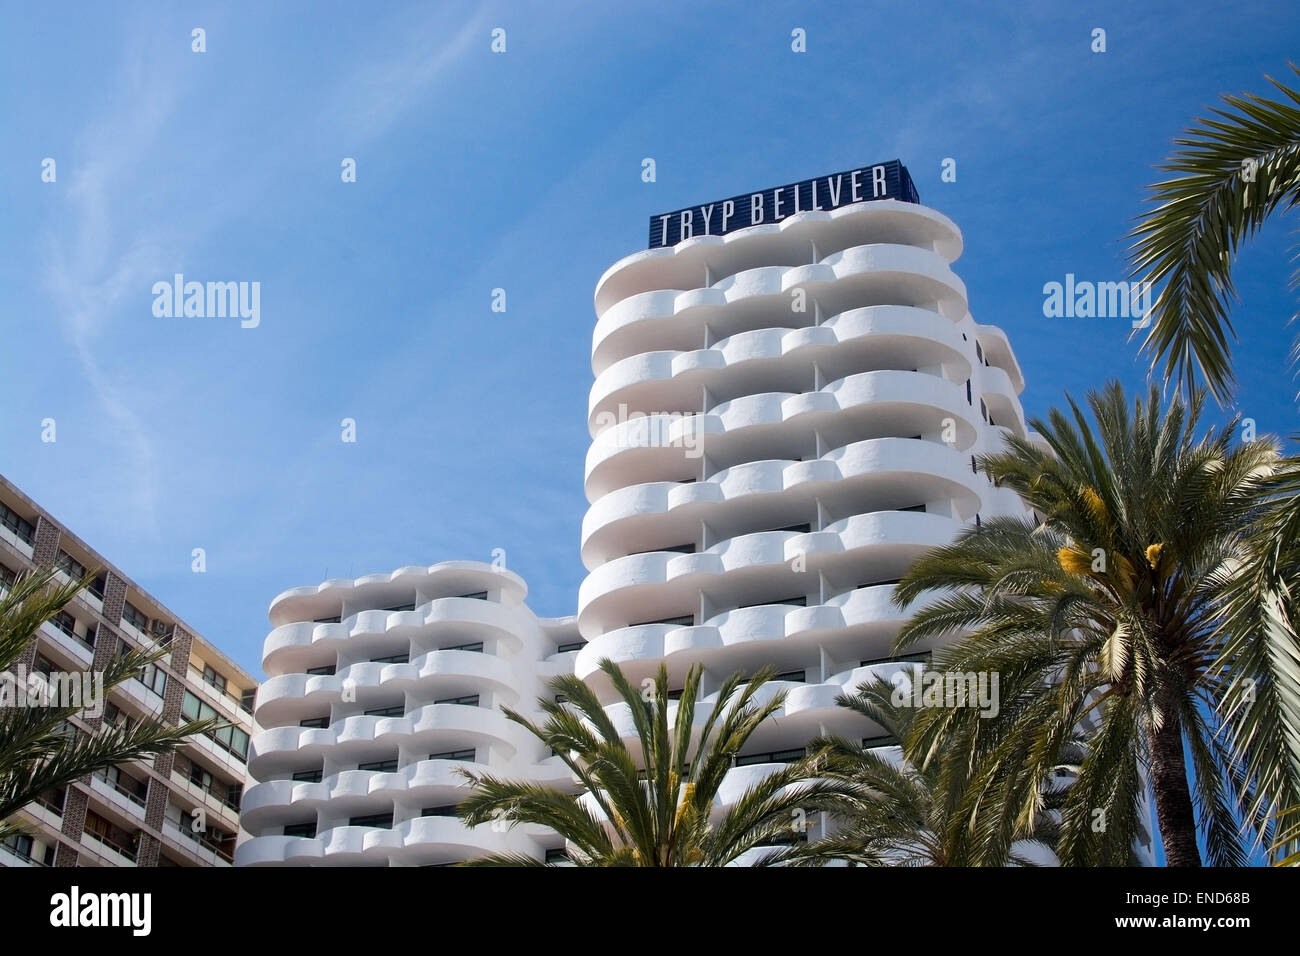 Tryp Bellver hotel on the Paseo Maritimo on April 19, 2015 in Palma de Mallorca, Balearic islands, Spain. Stock Photo